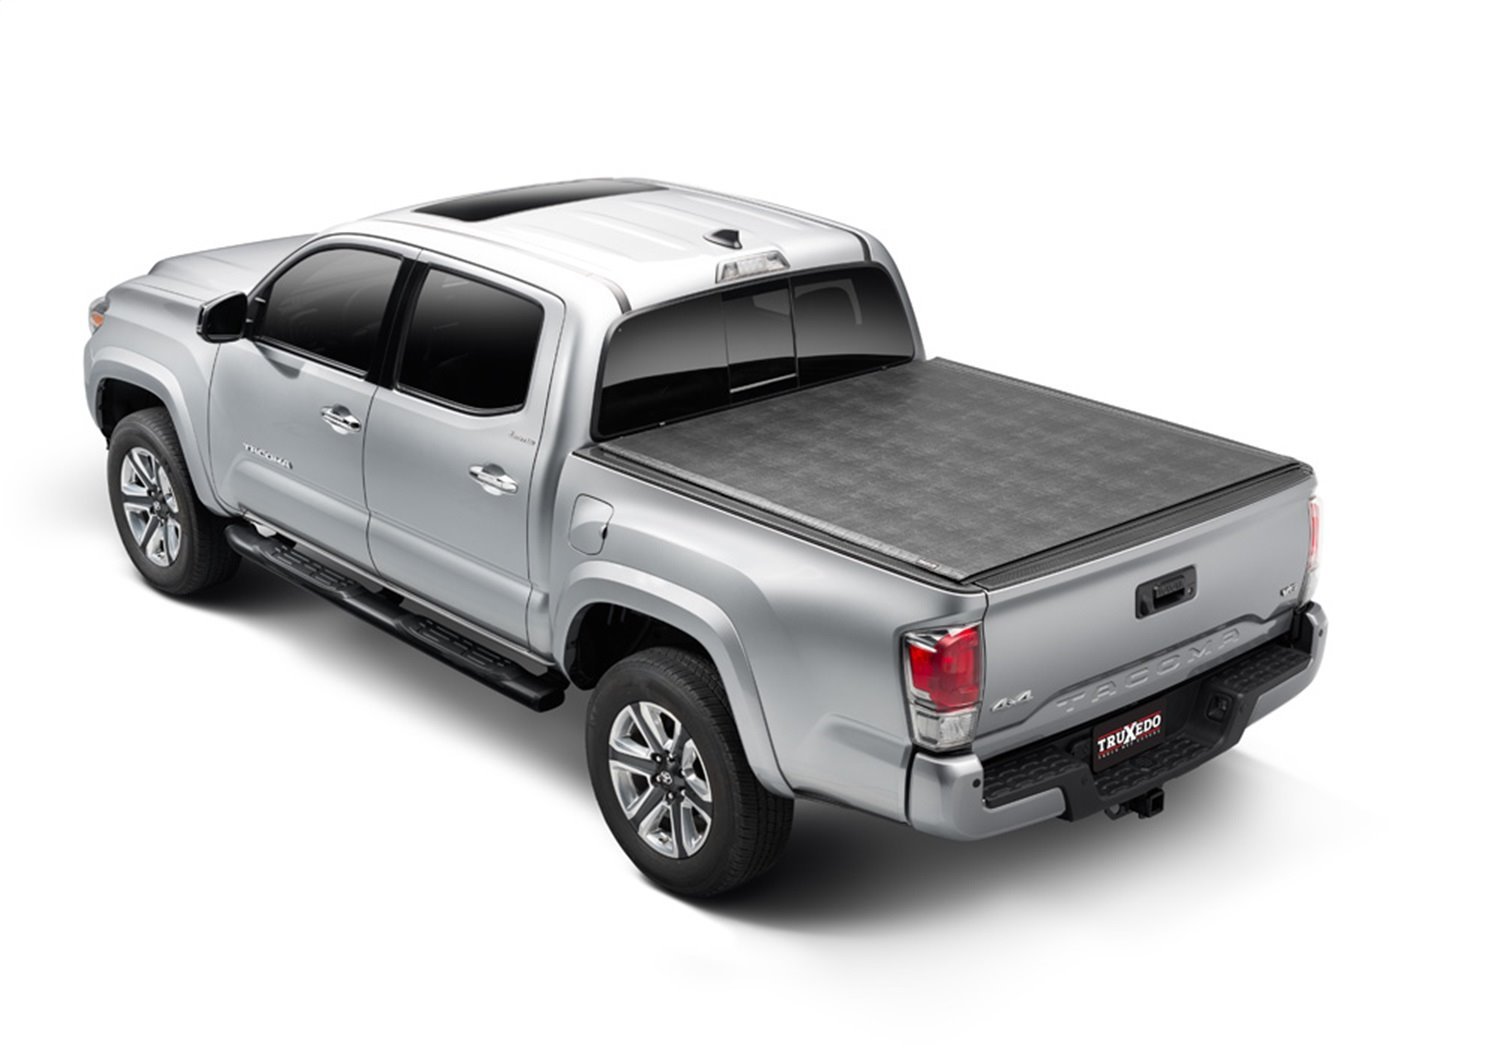 Sentry Roll-Up Tonneau Cover Fits Select Toyota Tundra, With Deck Rail System, Bed Length: 5 ft. 6 in.